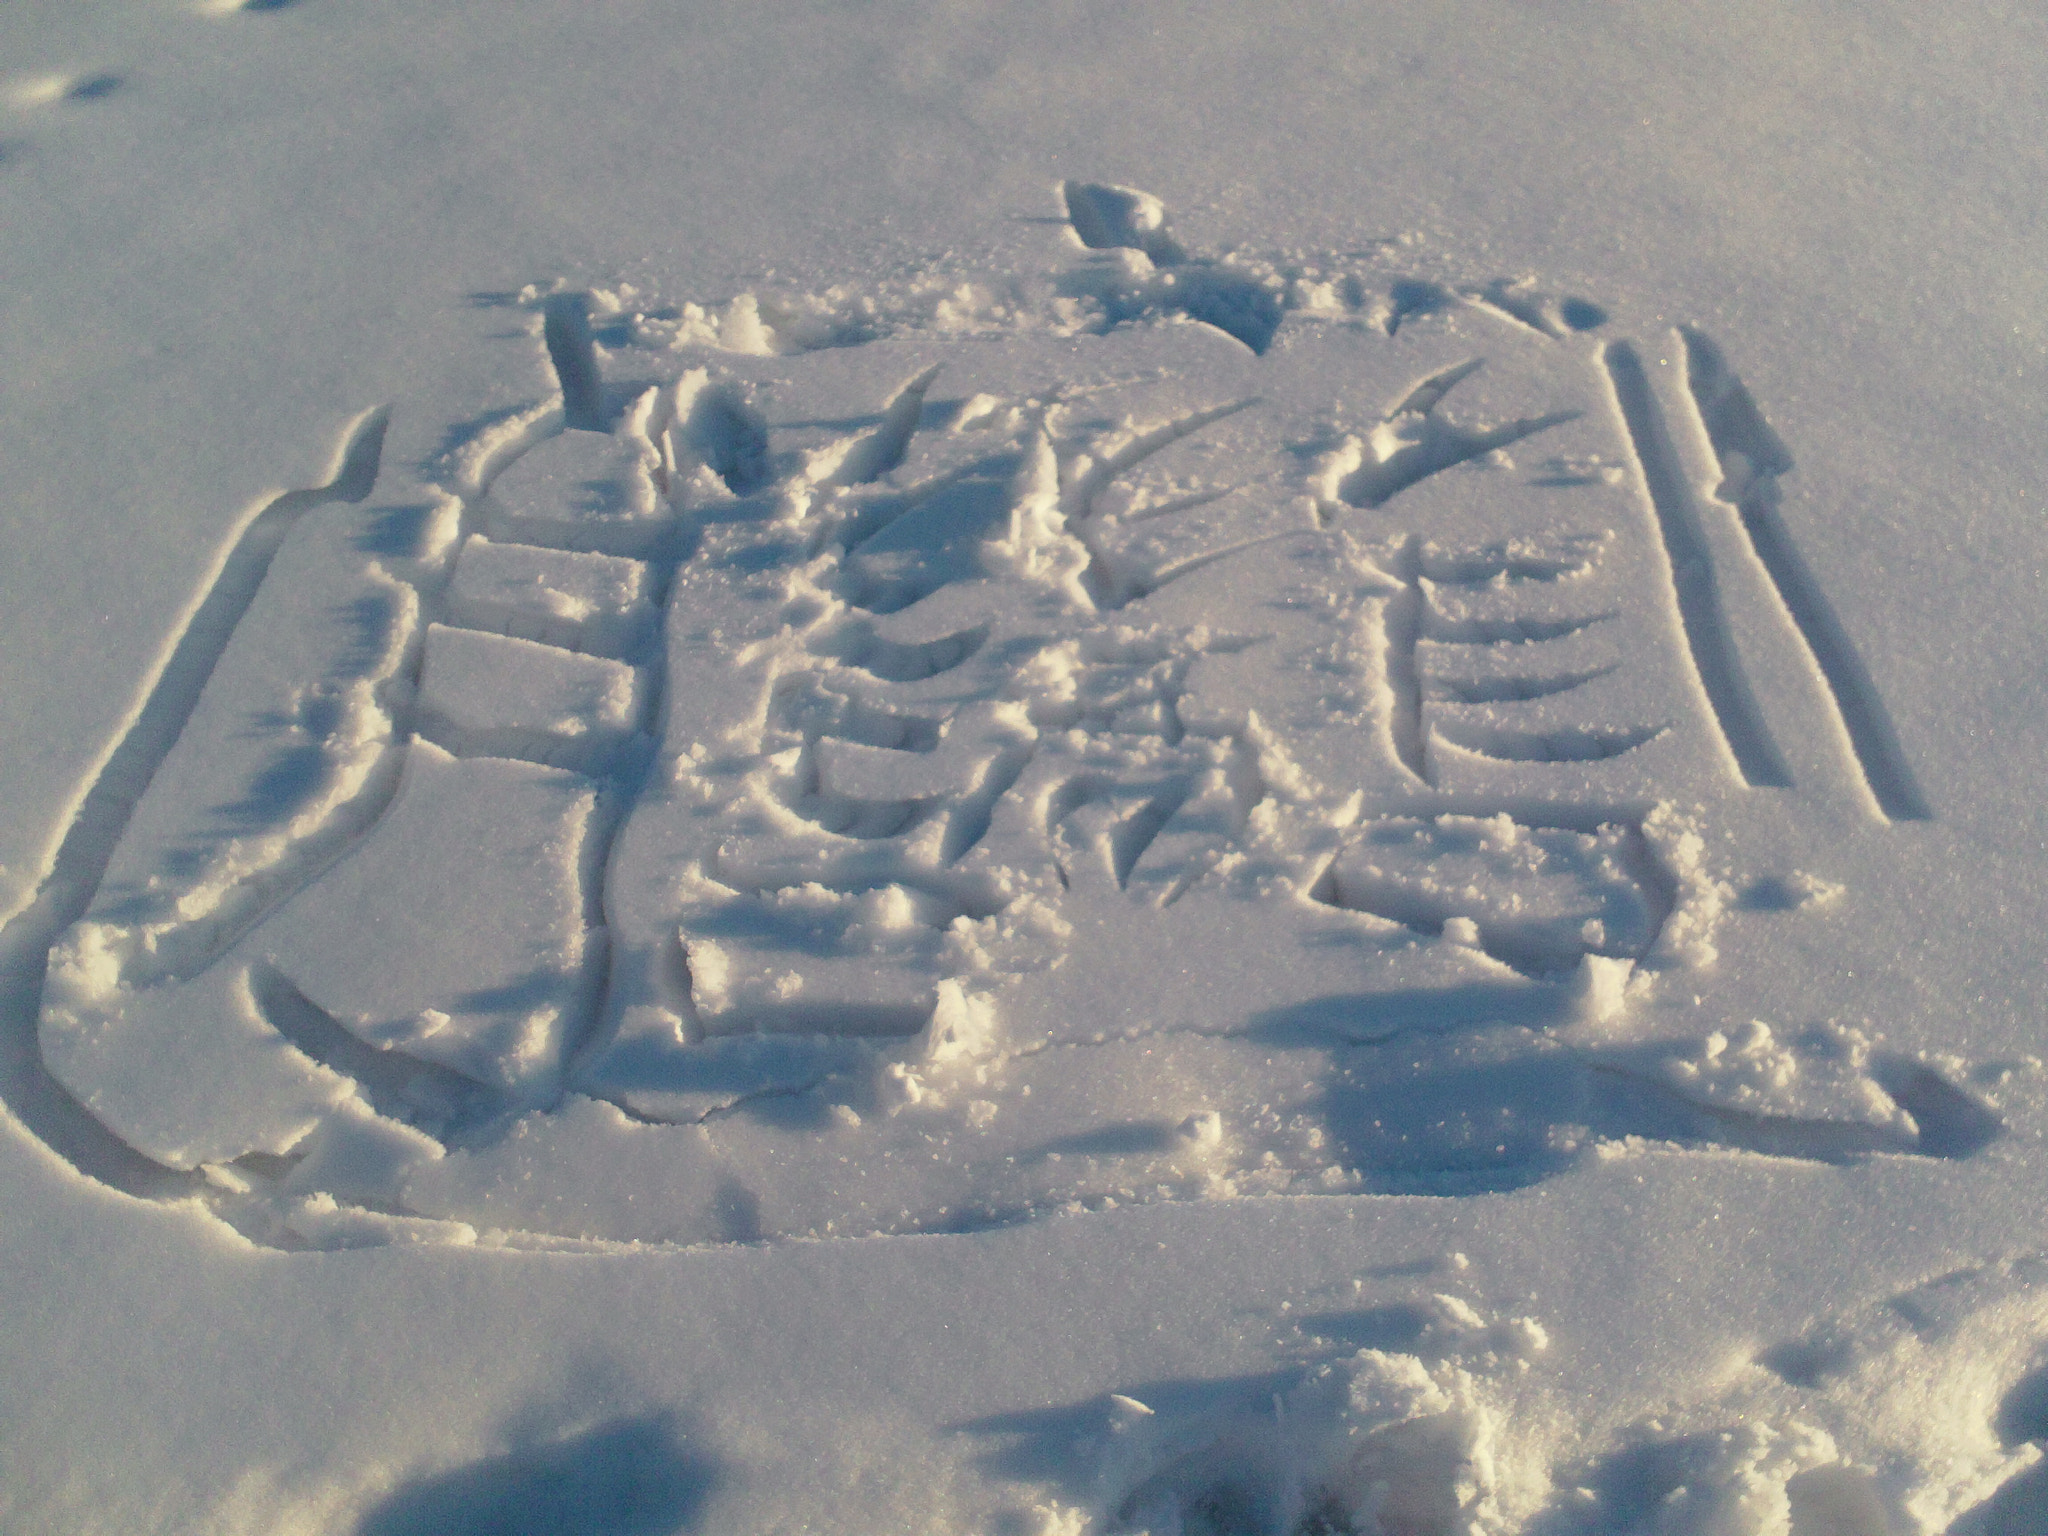 Samsung HMX-W300 sample photo. Chinese calligraphy in snow photography